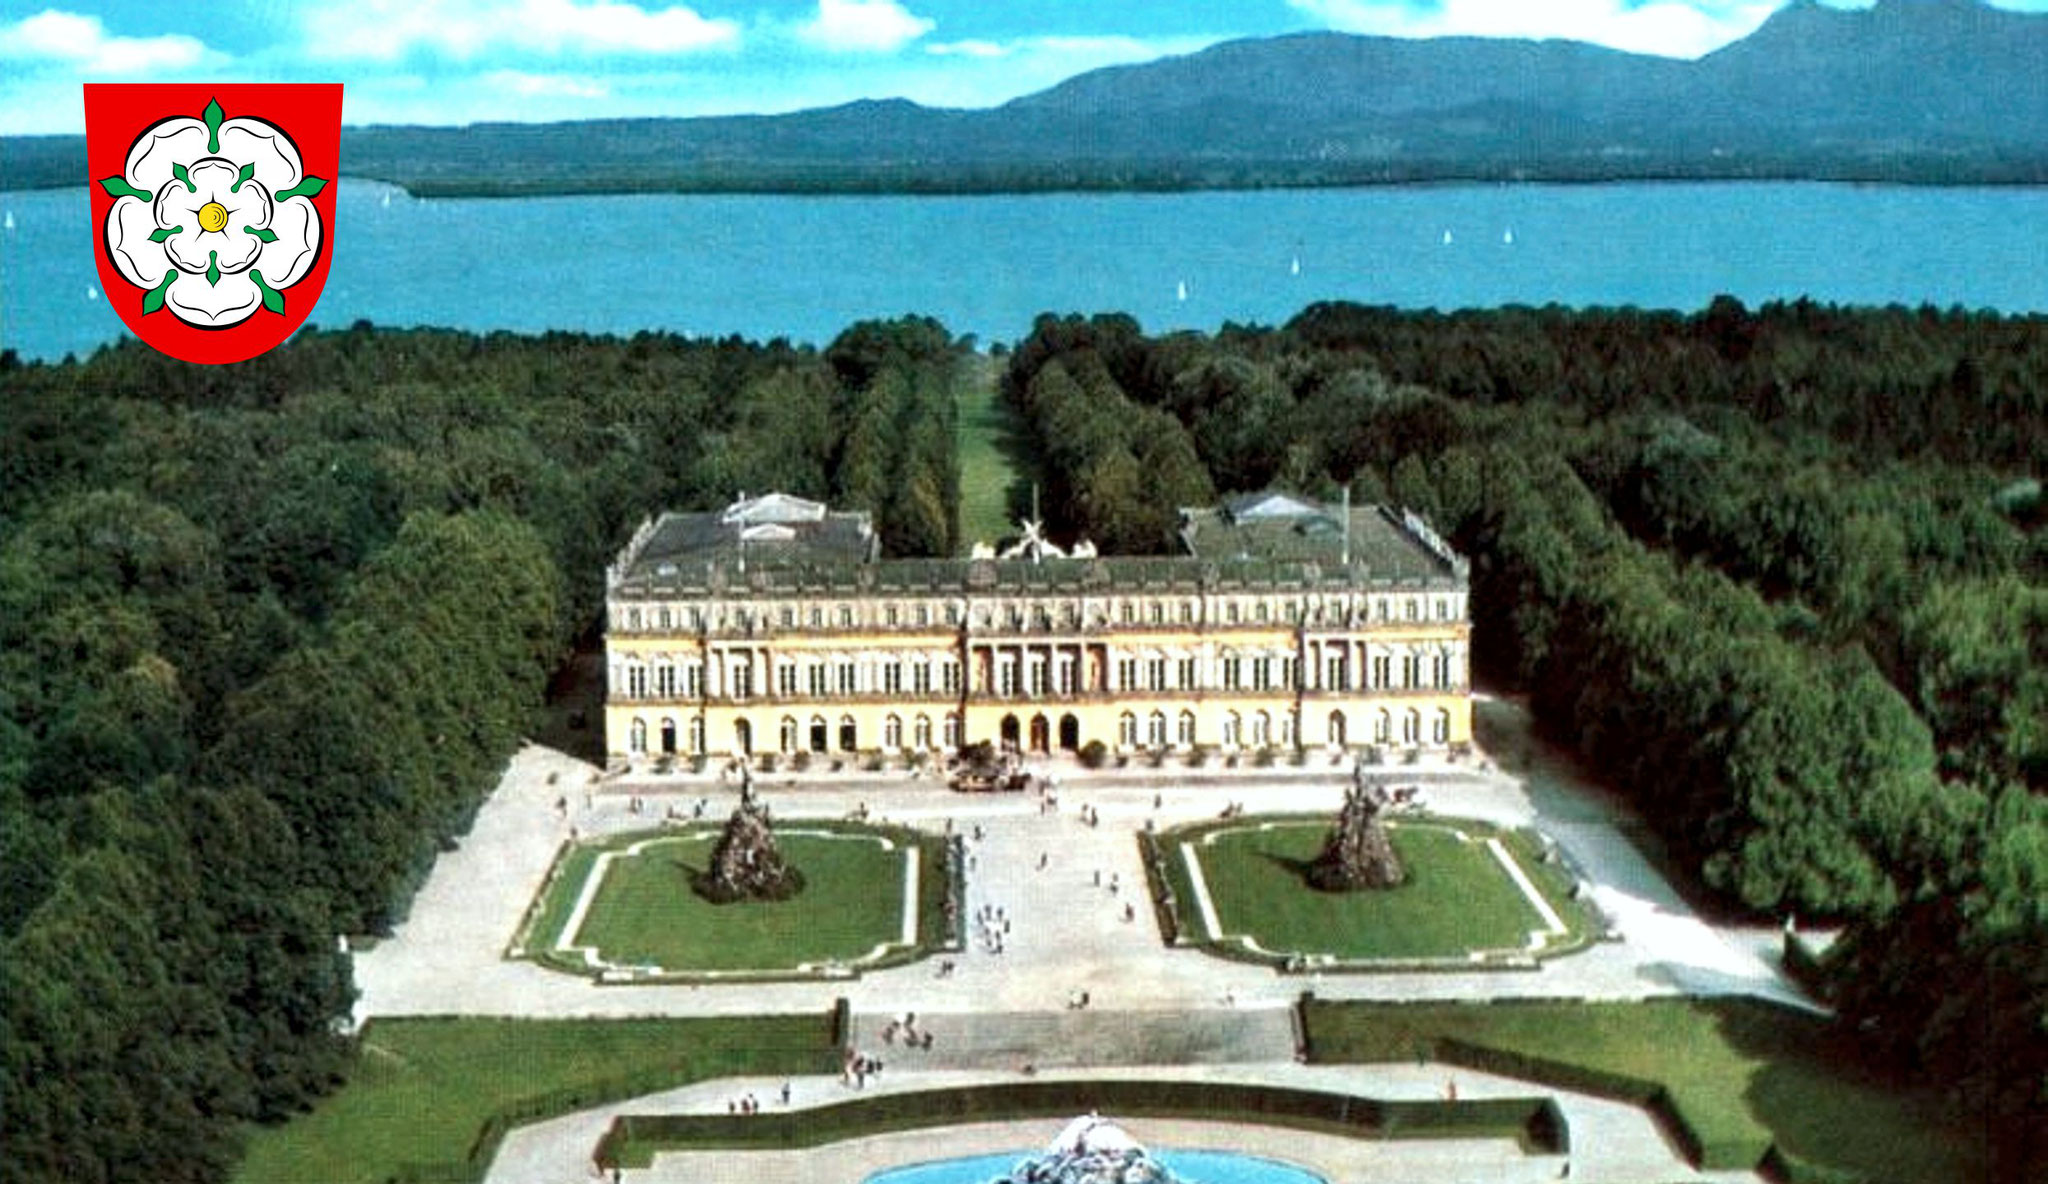 King Ludwigs 2 - The Sun-King and his unbelievable Castle Herrenchiemsee on the Island Herreninsel